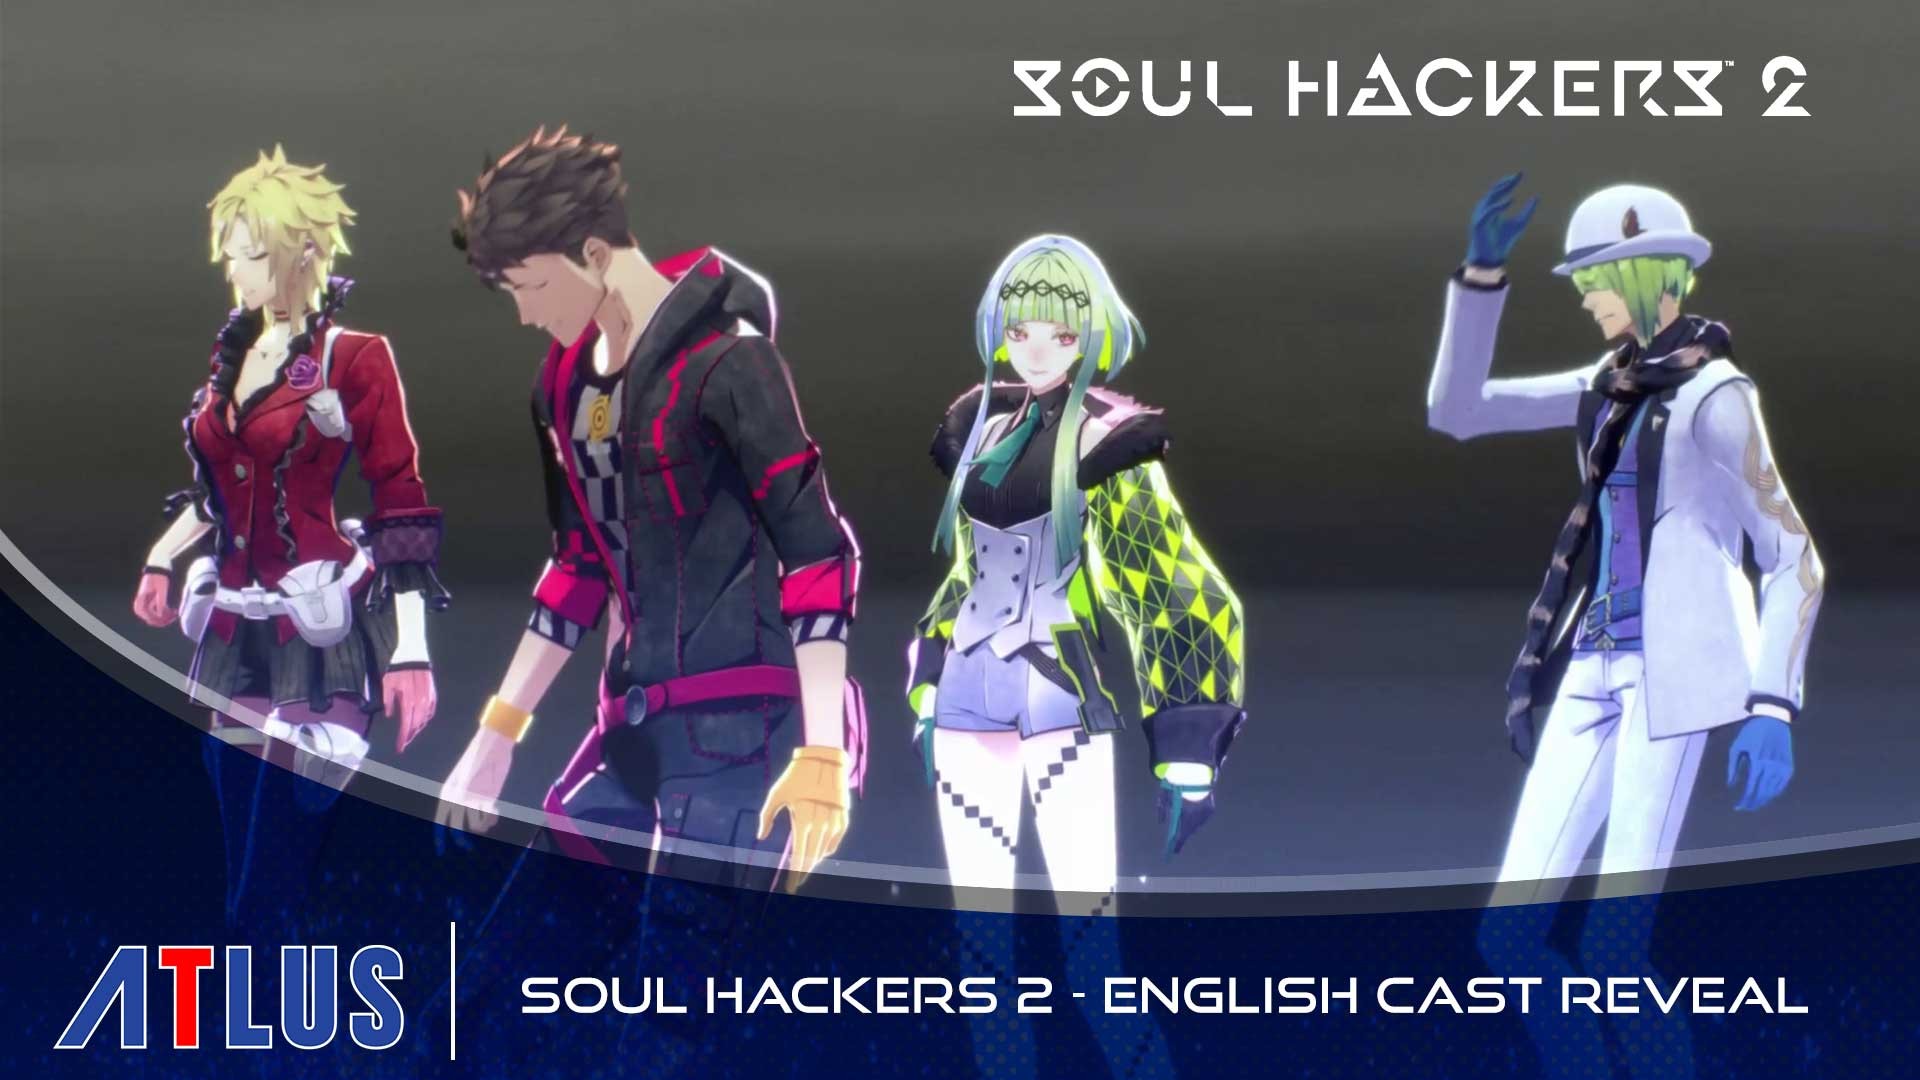 Soul Hackers 2 Release New Twisted Fates Trailer